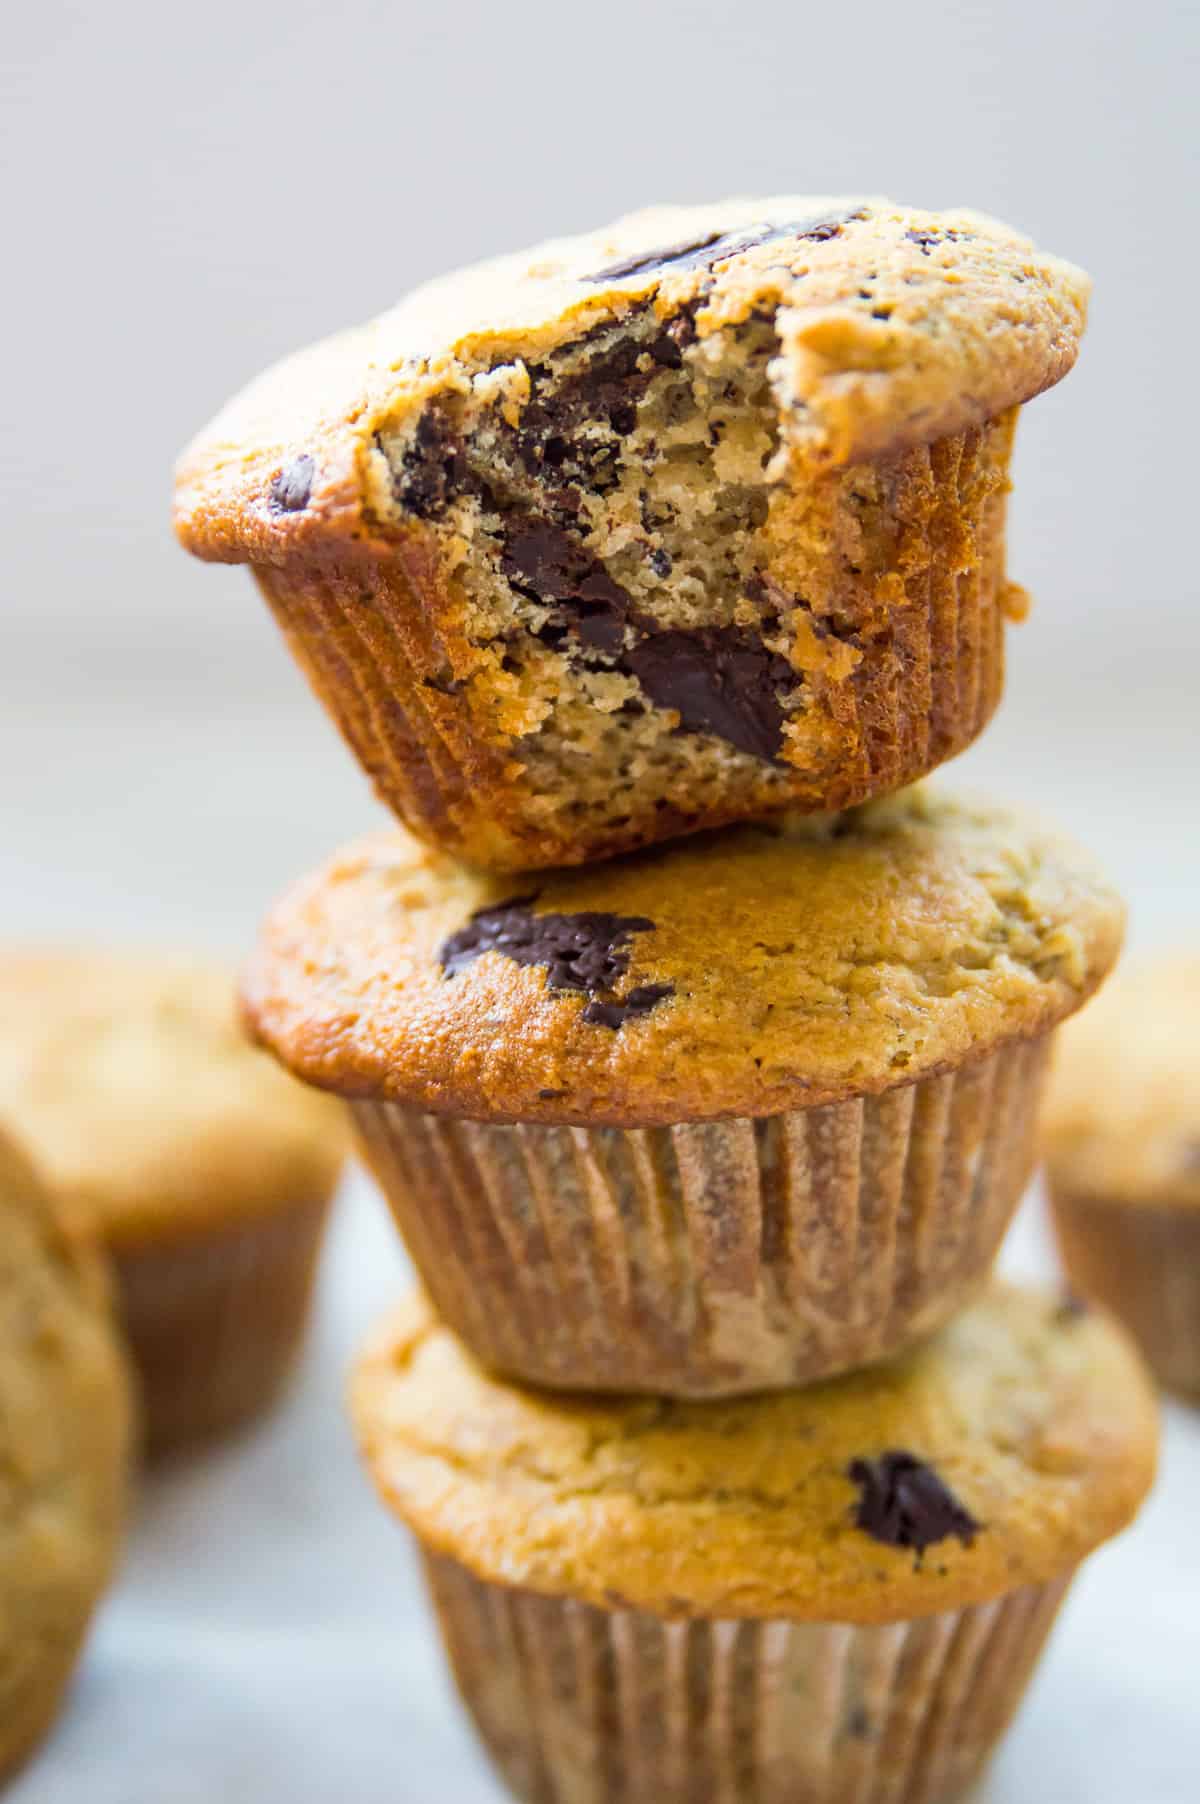 A stack of three banana chocolate muffins and the top muffin has a bite out of it.